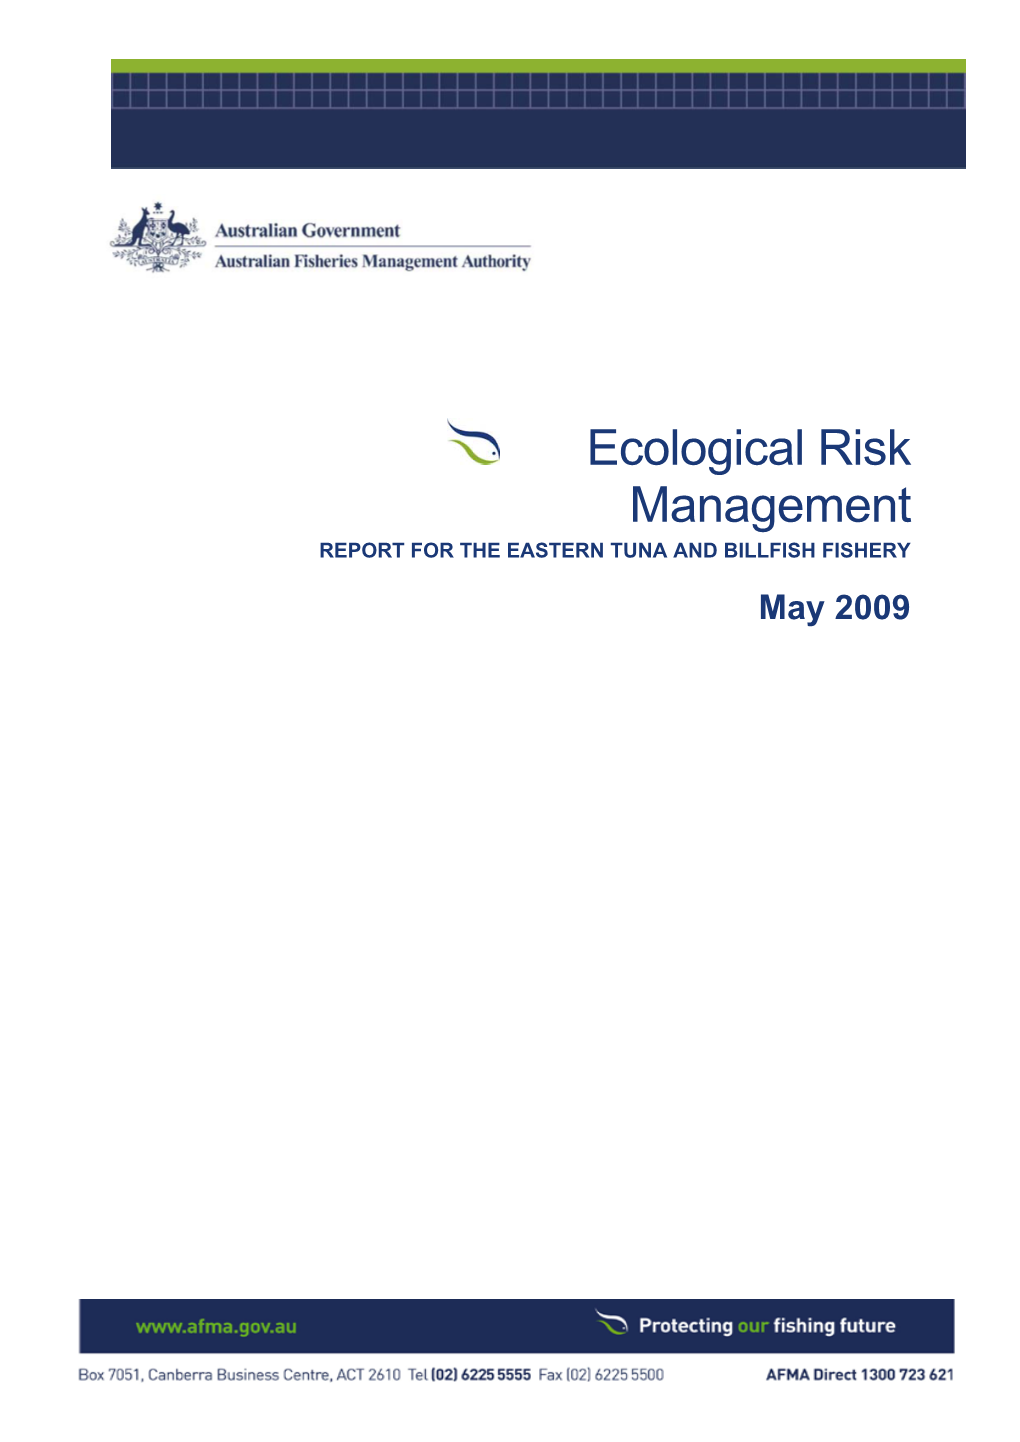 Ecological Risk Management REPORT for the EASTERN TUNA and BILLFISH FISHERY